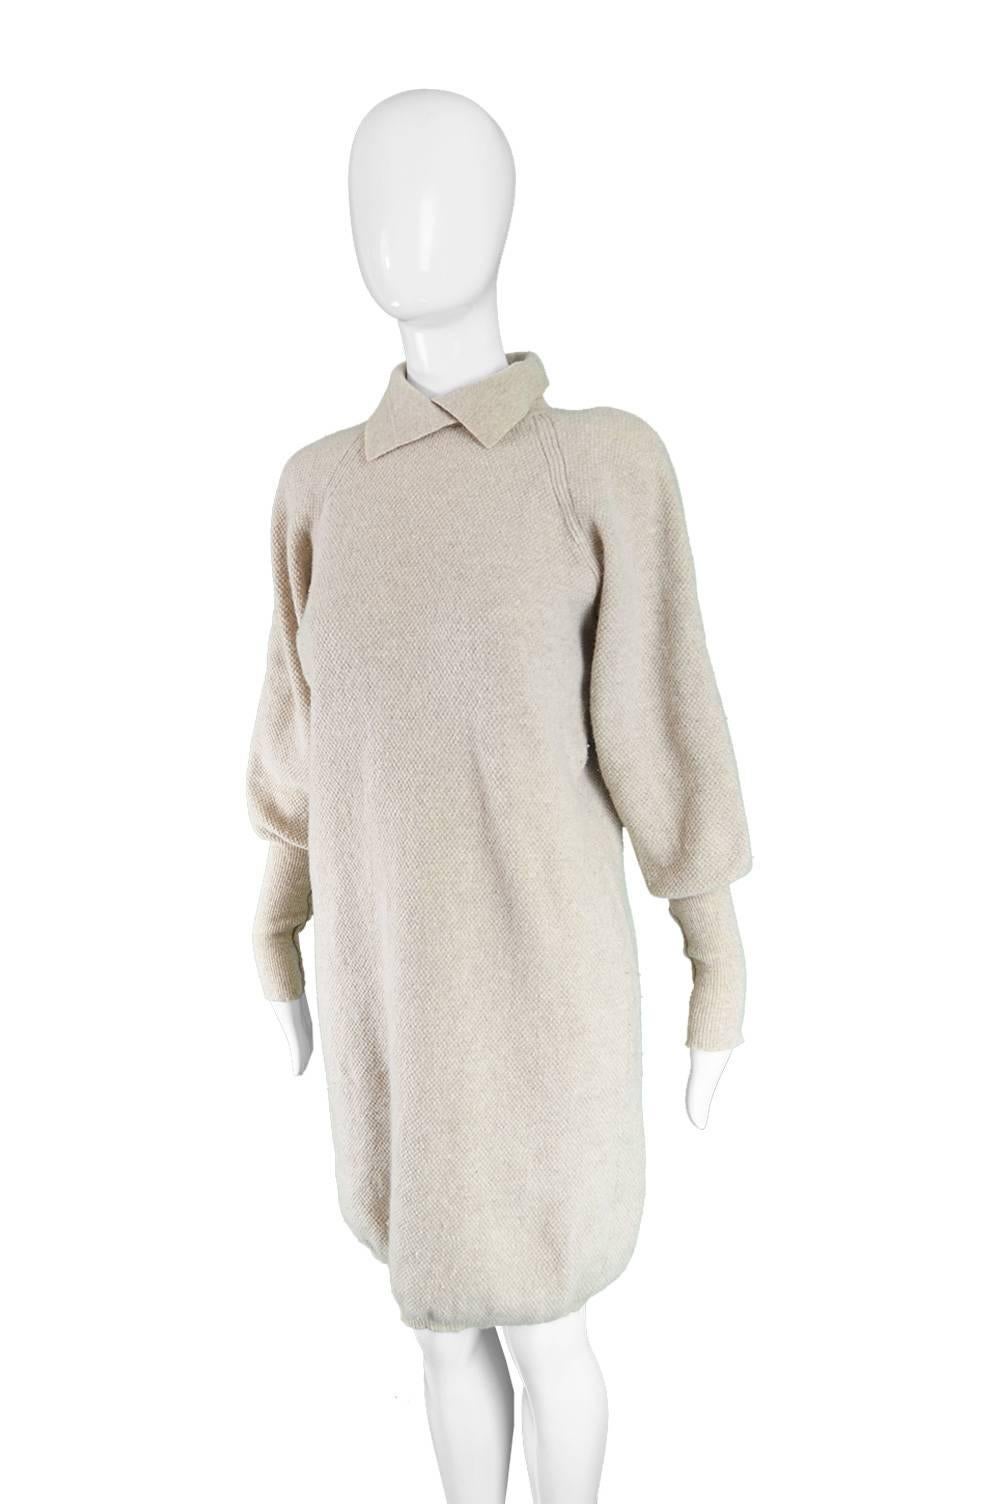 Kenzo Vintage Cream Wool Knit Leg-of-Mutton Sleeve Sweater Shift Dress, 1980s In Excellent Condition In Doncaster, South Yorkshire